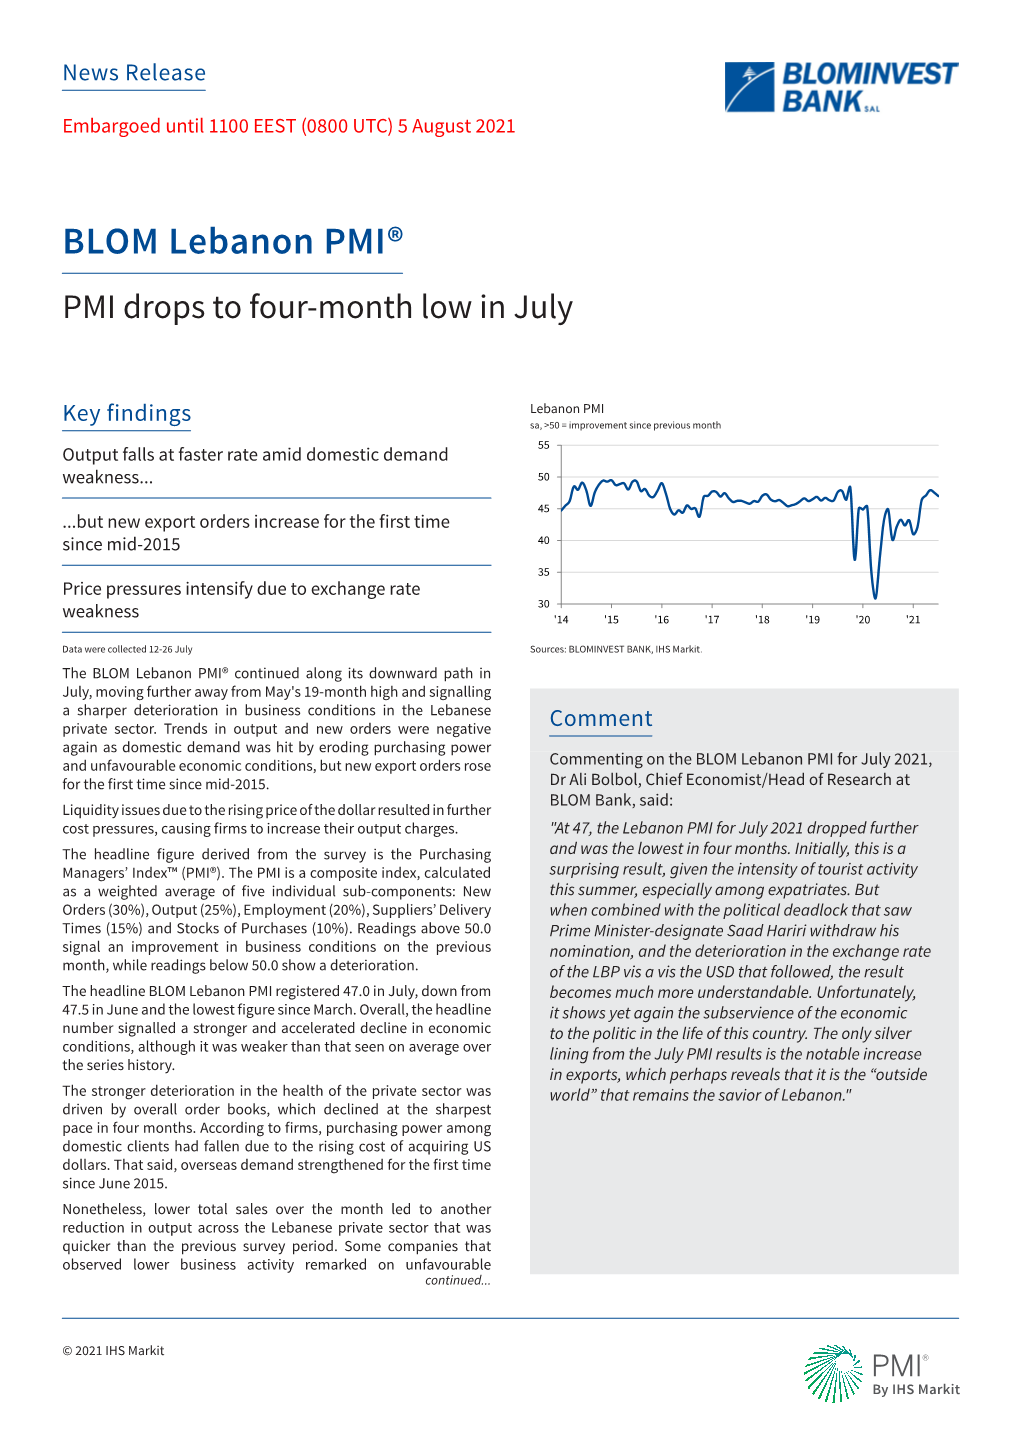 BLOM Lebanon PMI® PMI Drops to Four-Month Low in July